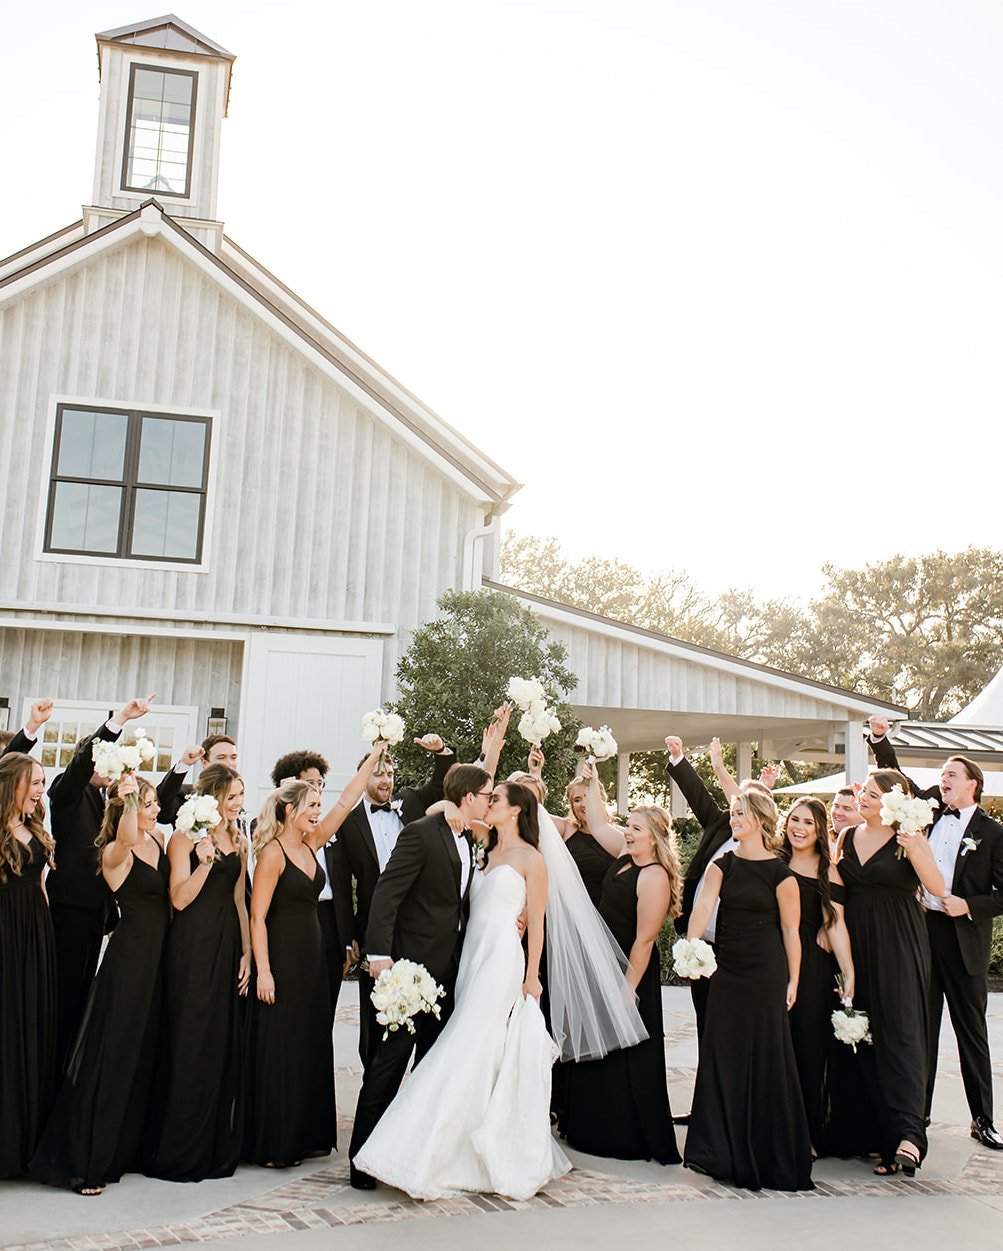 A bride and groom kiss with their wedding party celebrating behind them at their elegant summer wedding in Montgomery, TX.